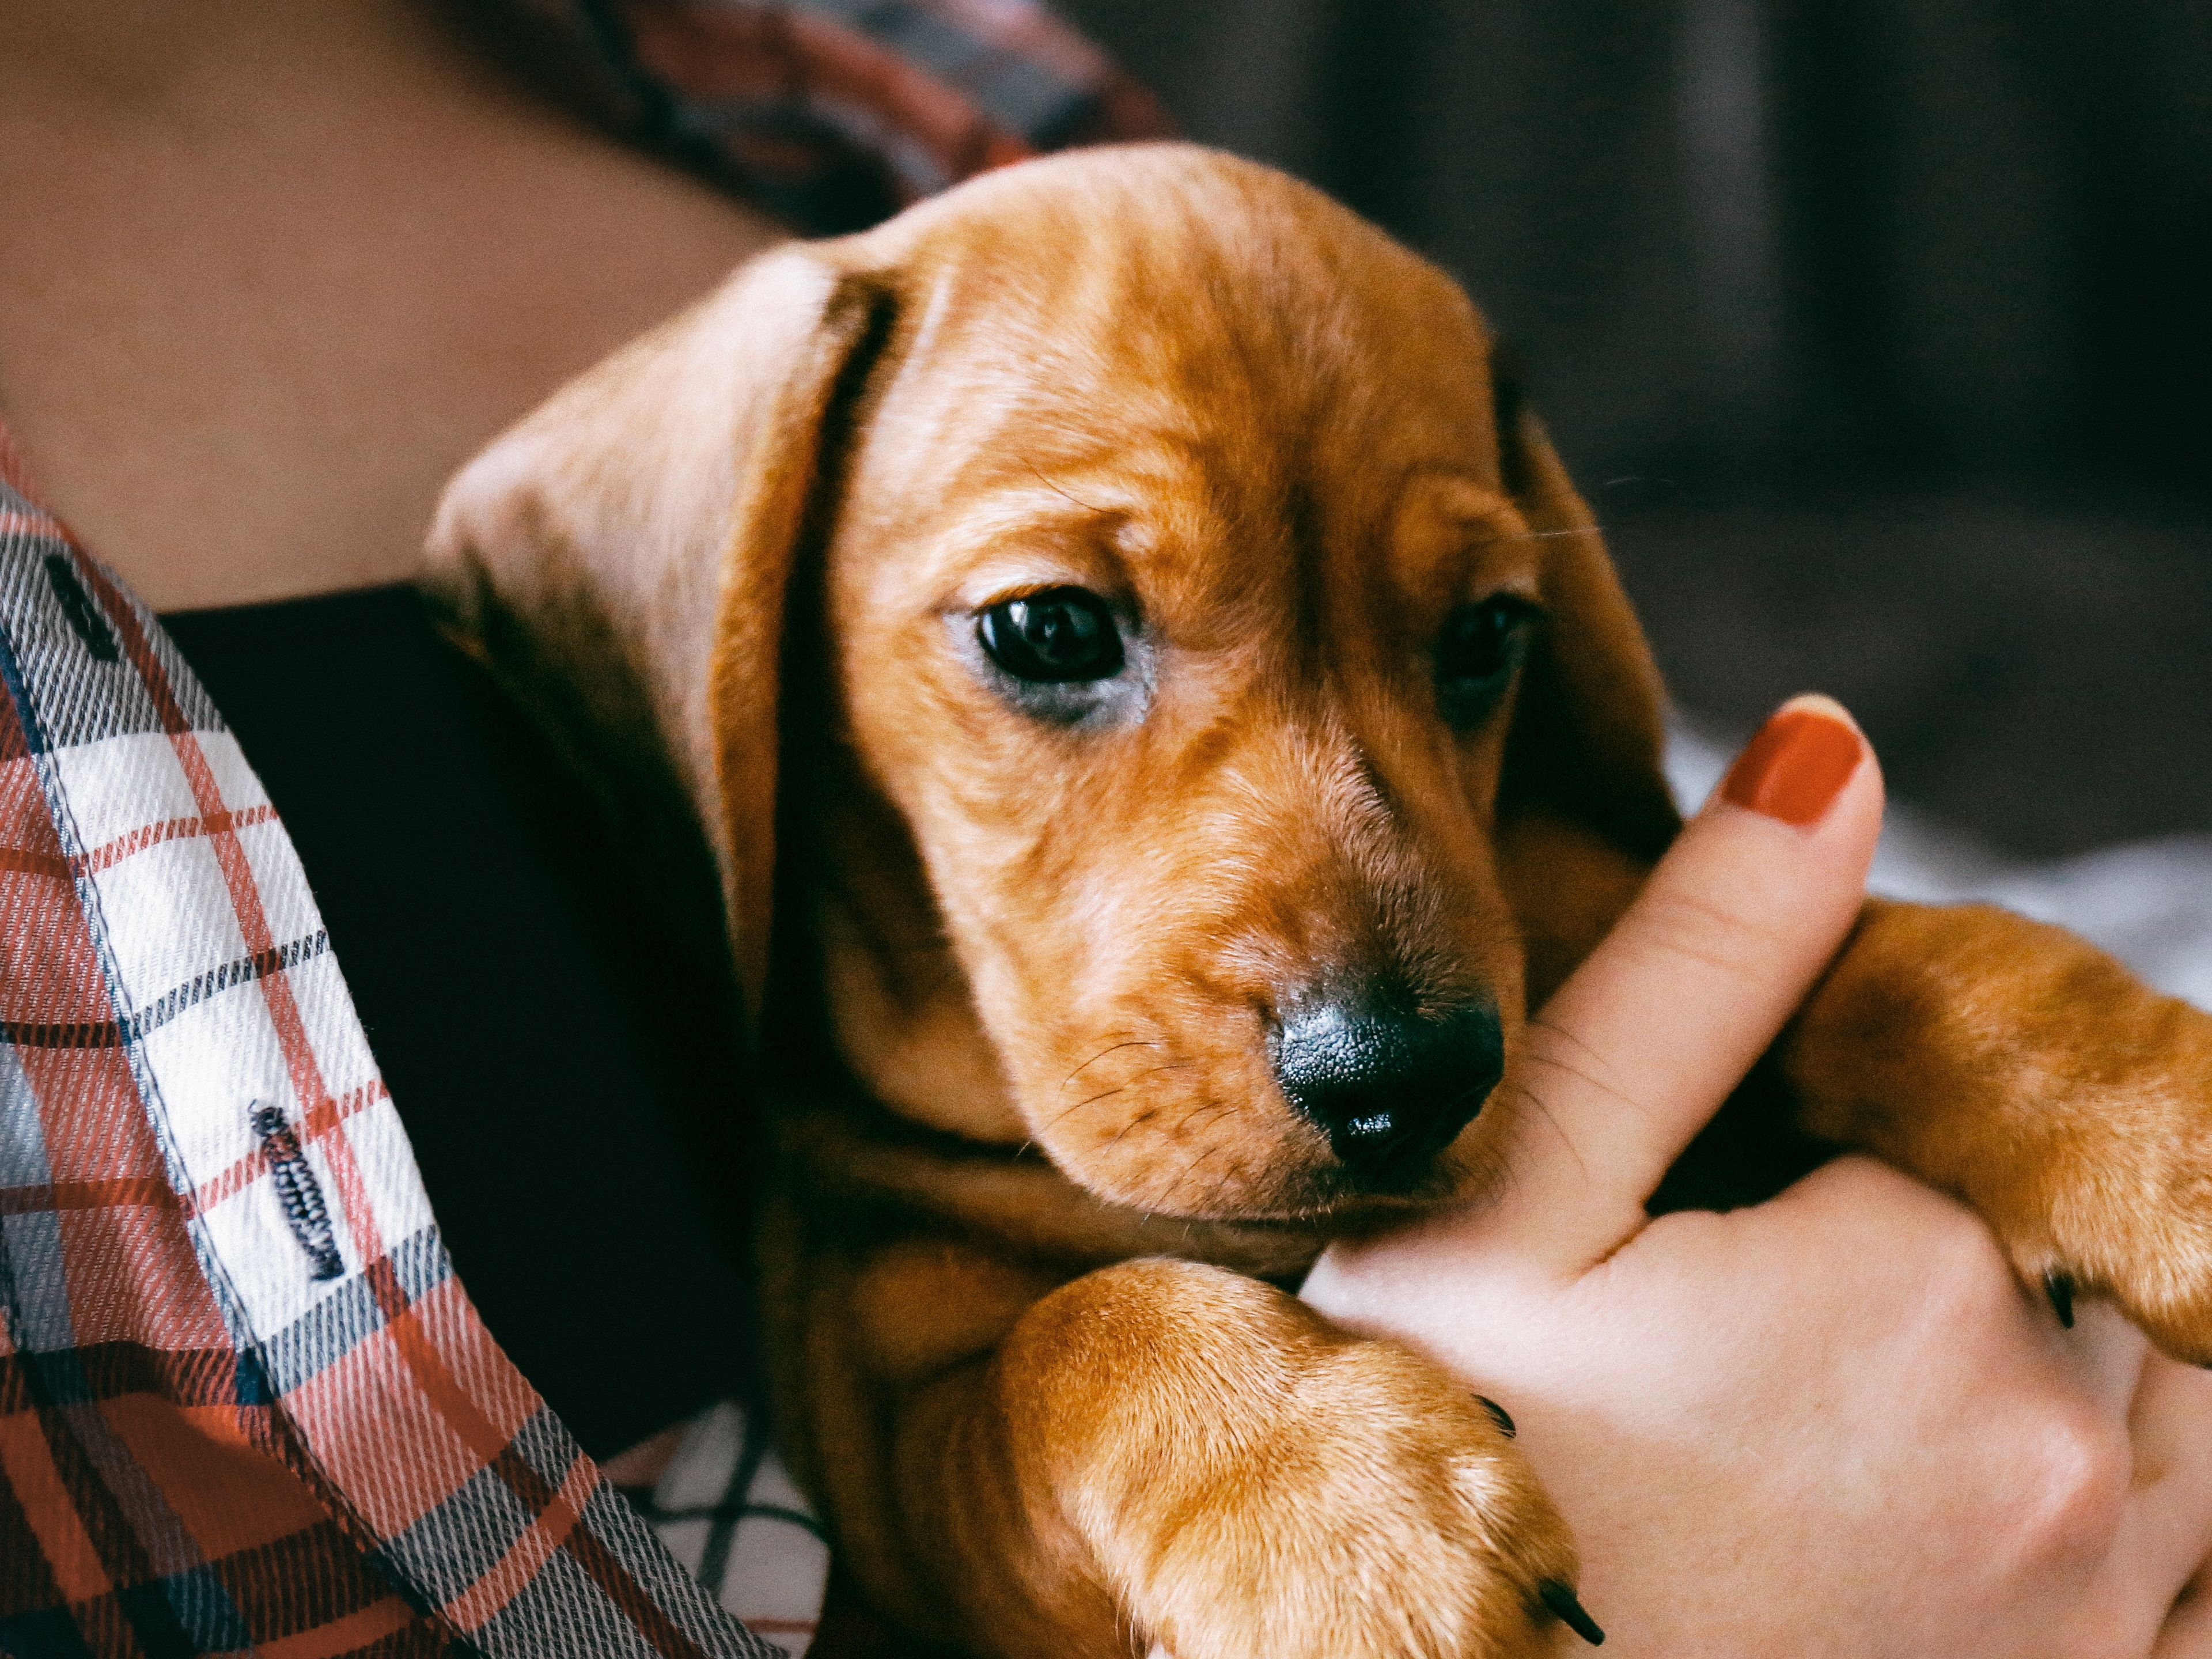 Dachshund puppy being held by owner